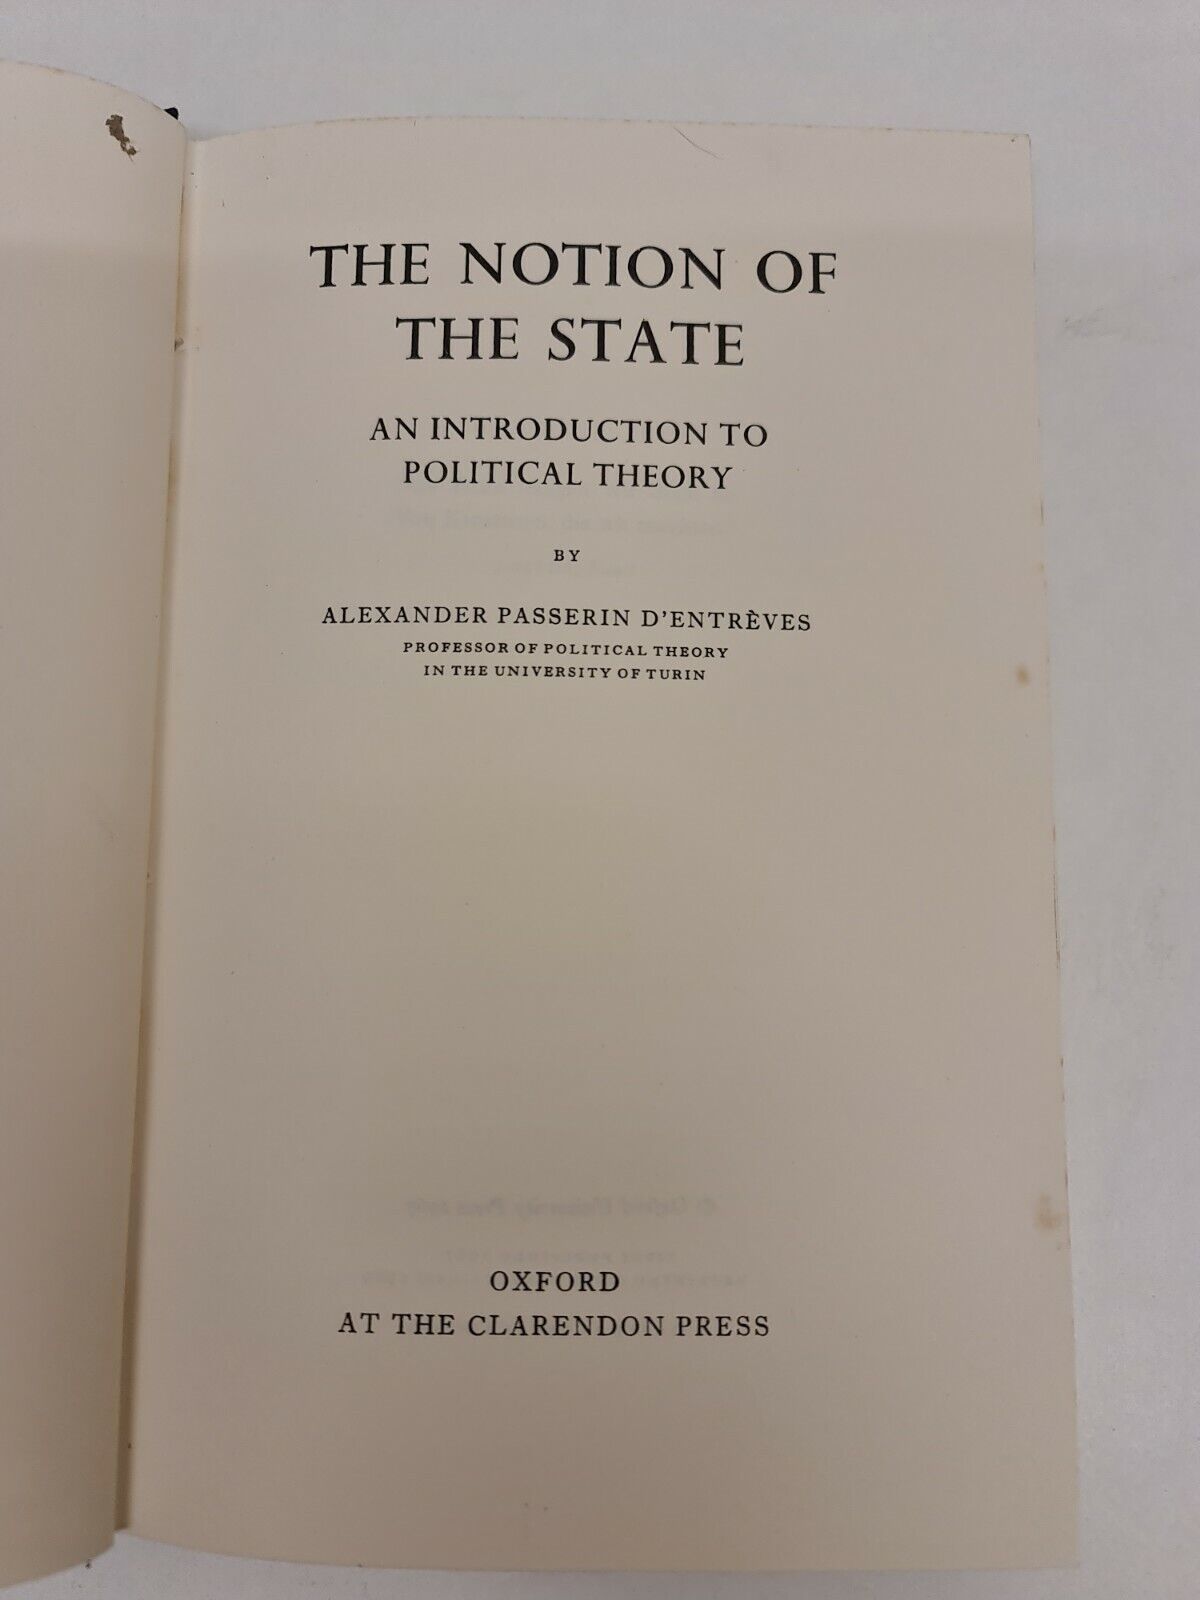 The Notion of the State by Alexander Passerin D'Entreves (1969)